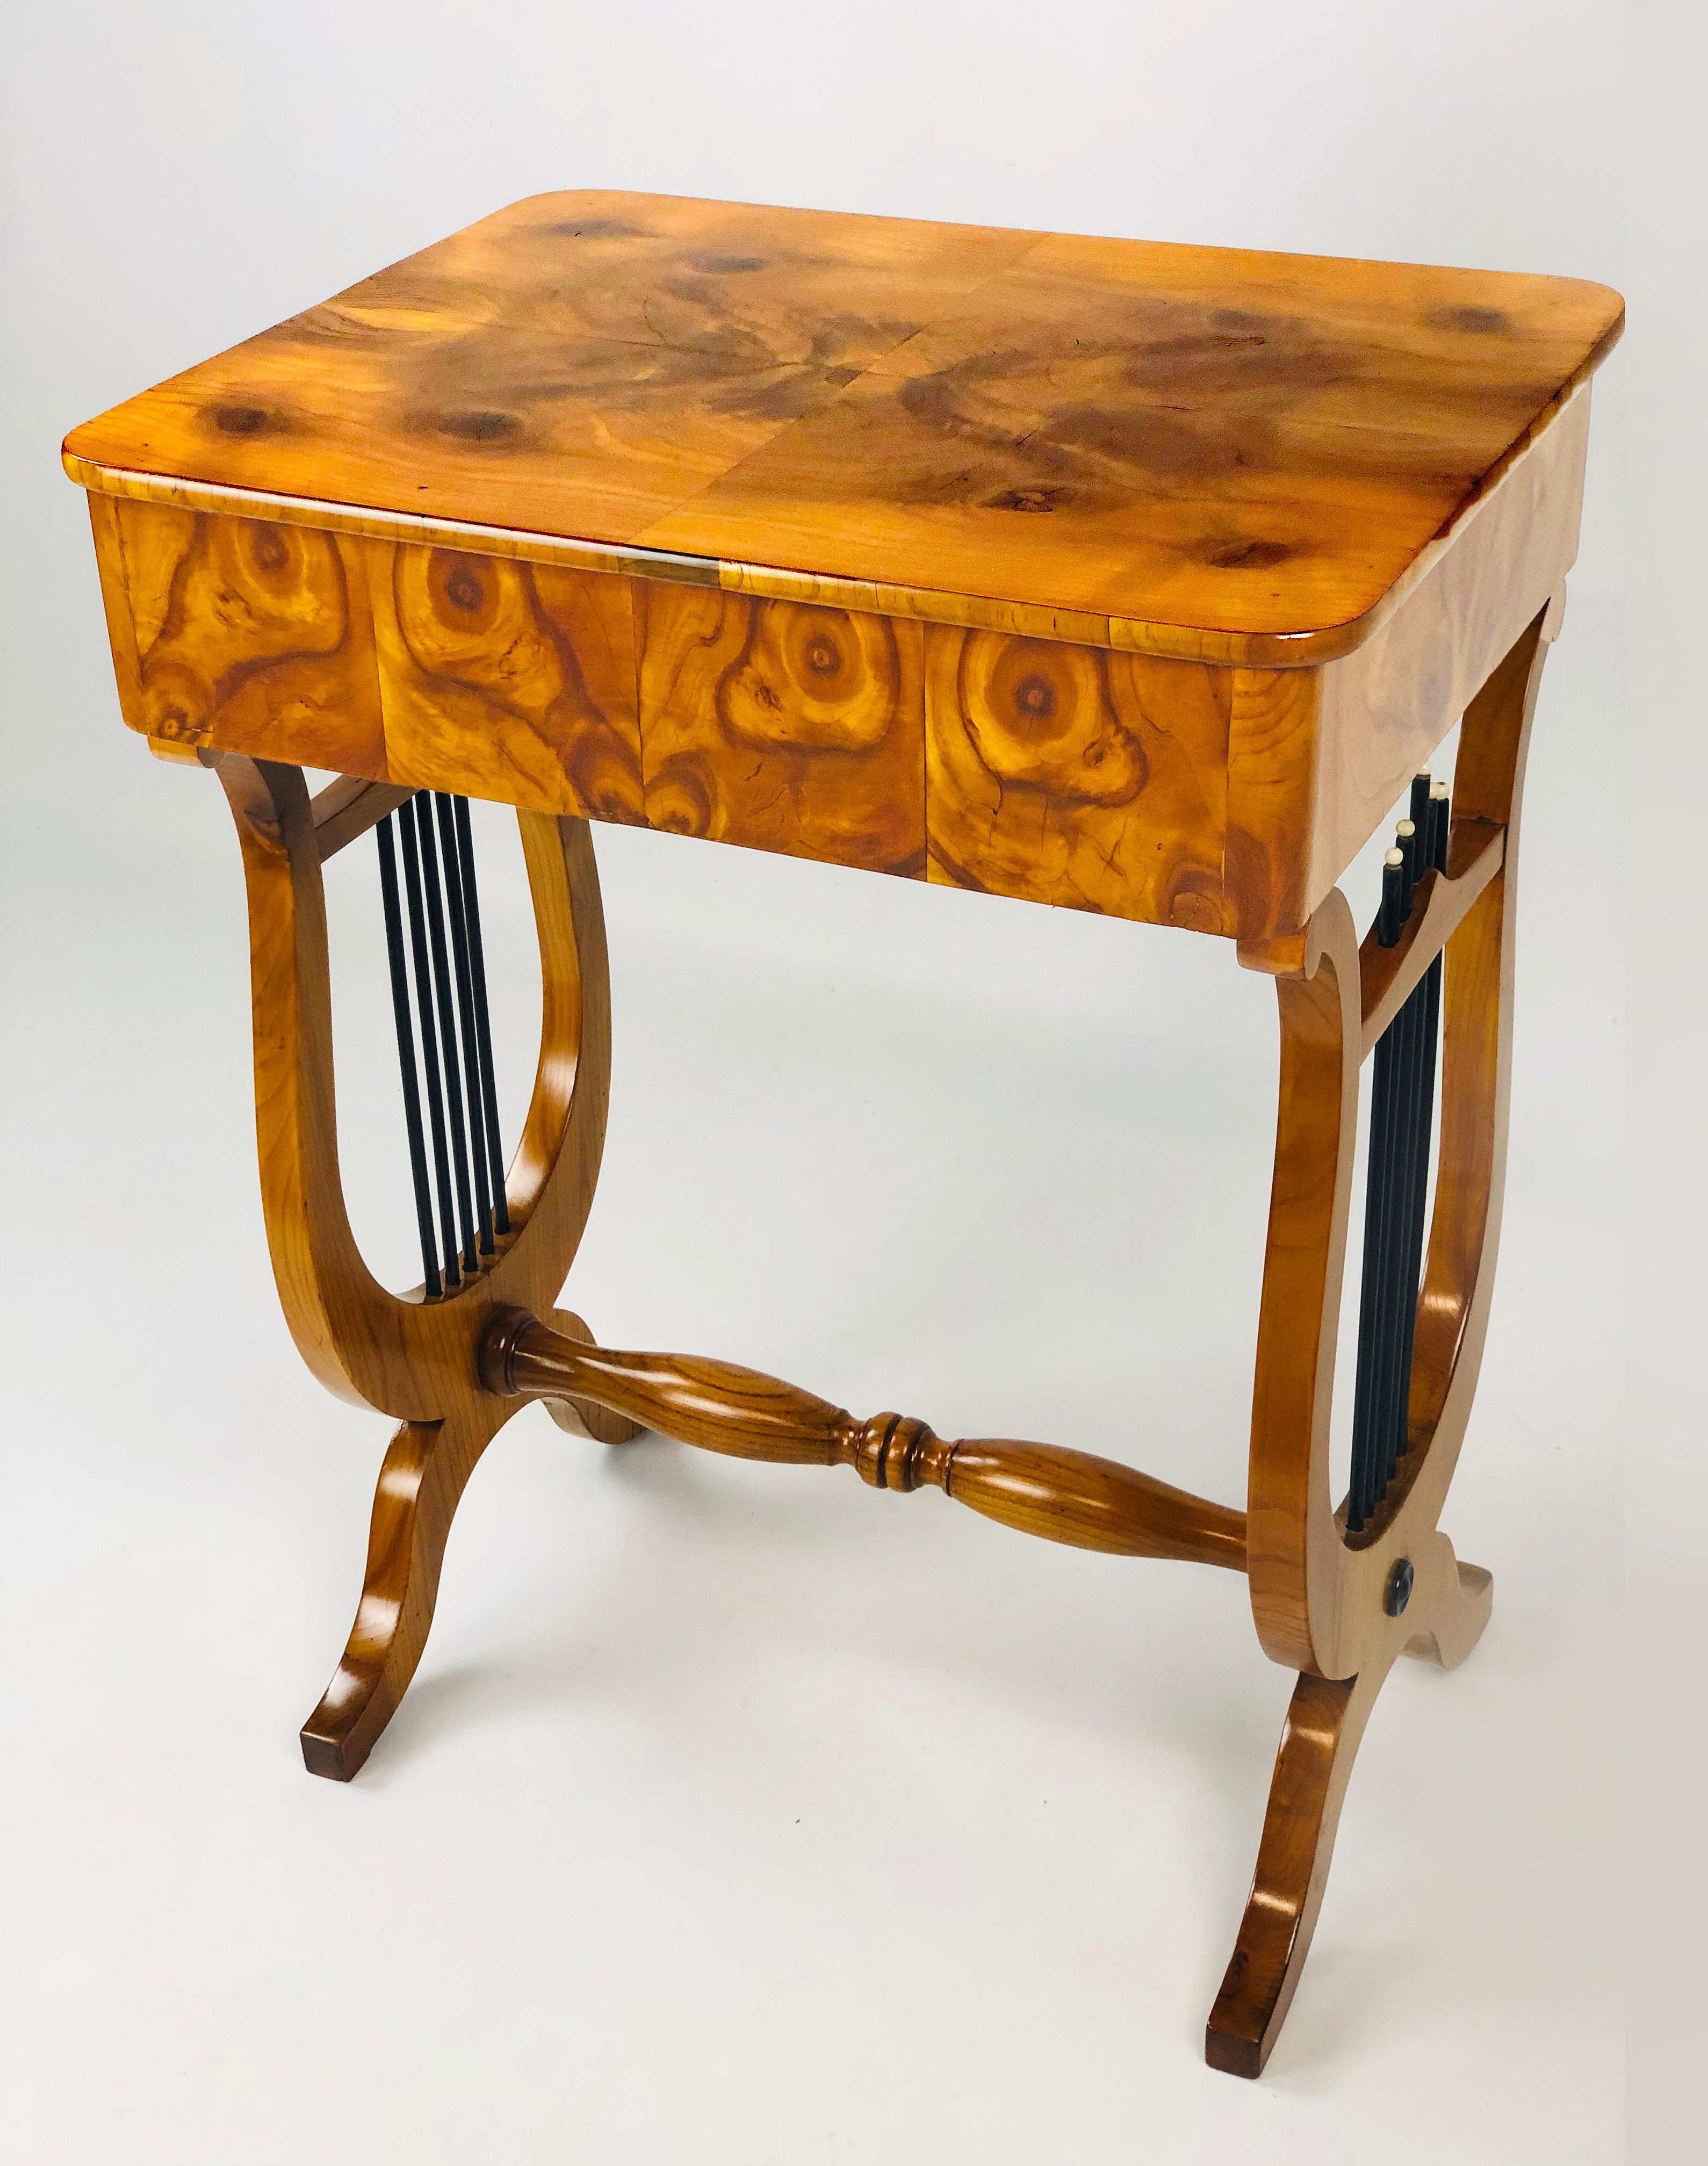 Outstanding early 19th century German Biedermeier sewing side table with twin lyre base, the top and aprons adorned with rare oyster walnut veneer. The single drawer has several small compartments and an original folding needle cushion. The top is